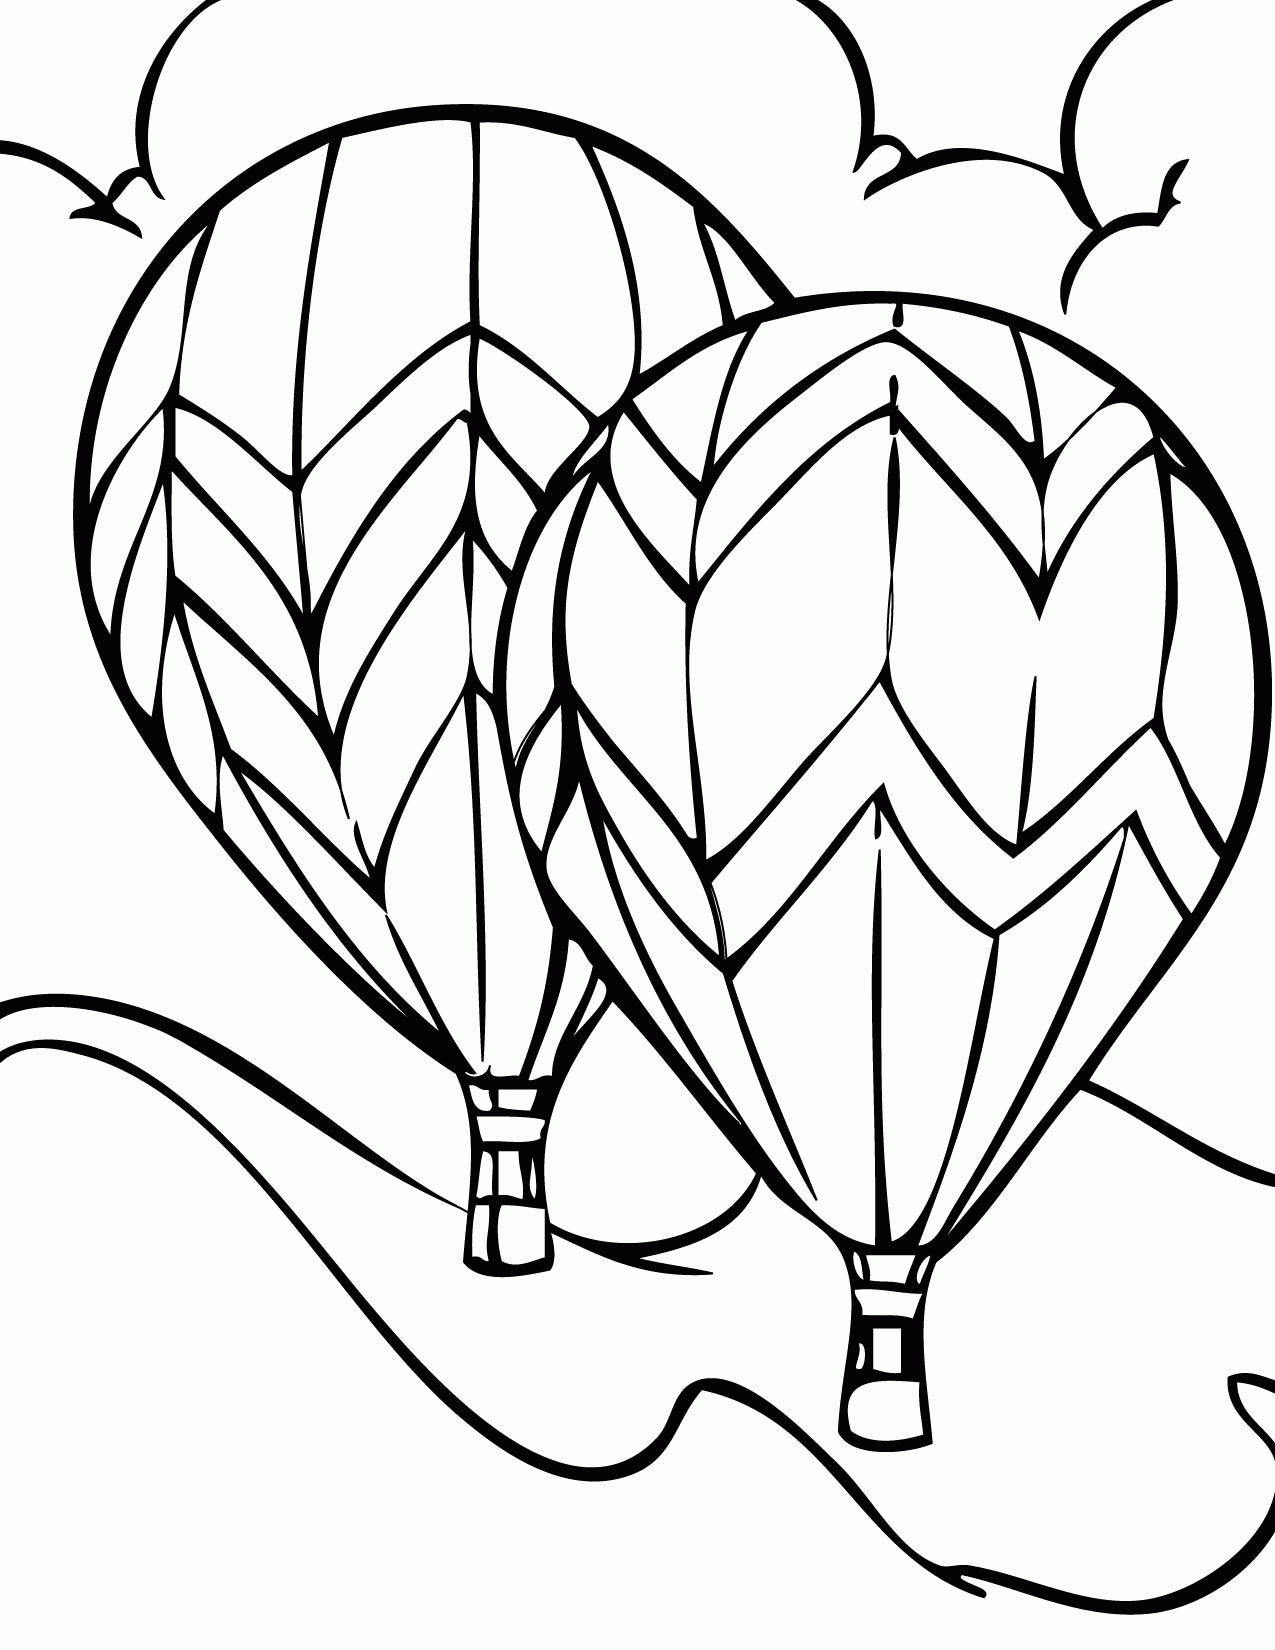 Coloring pages free hot air balloon coloring pages